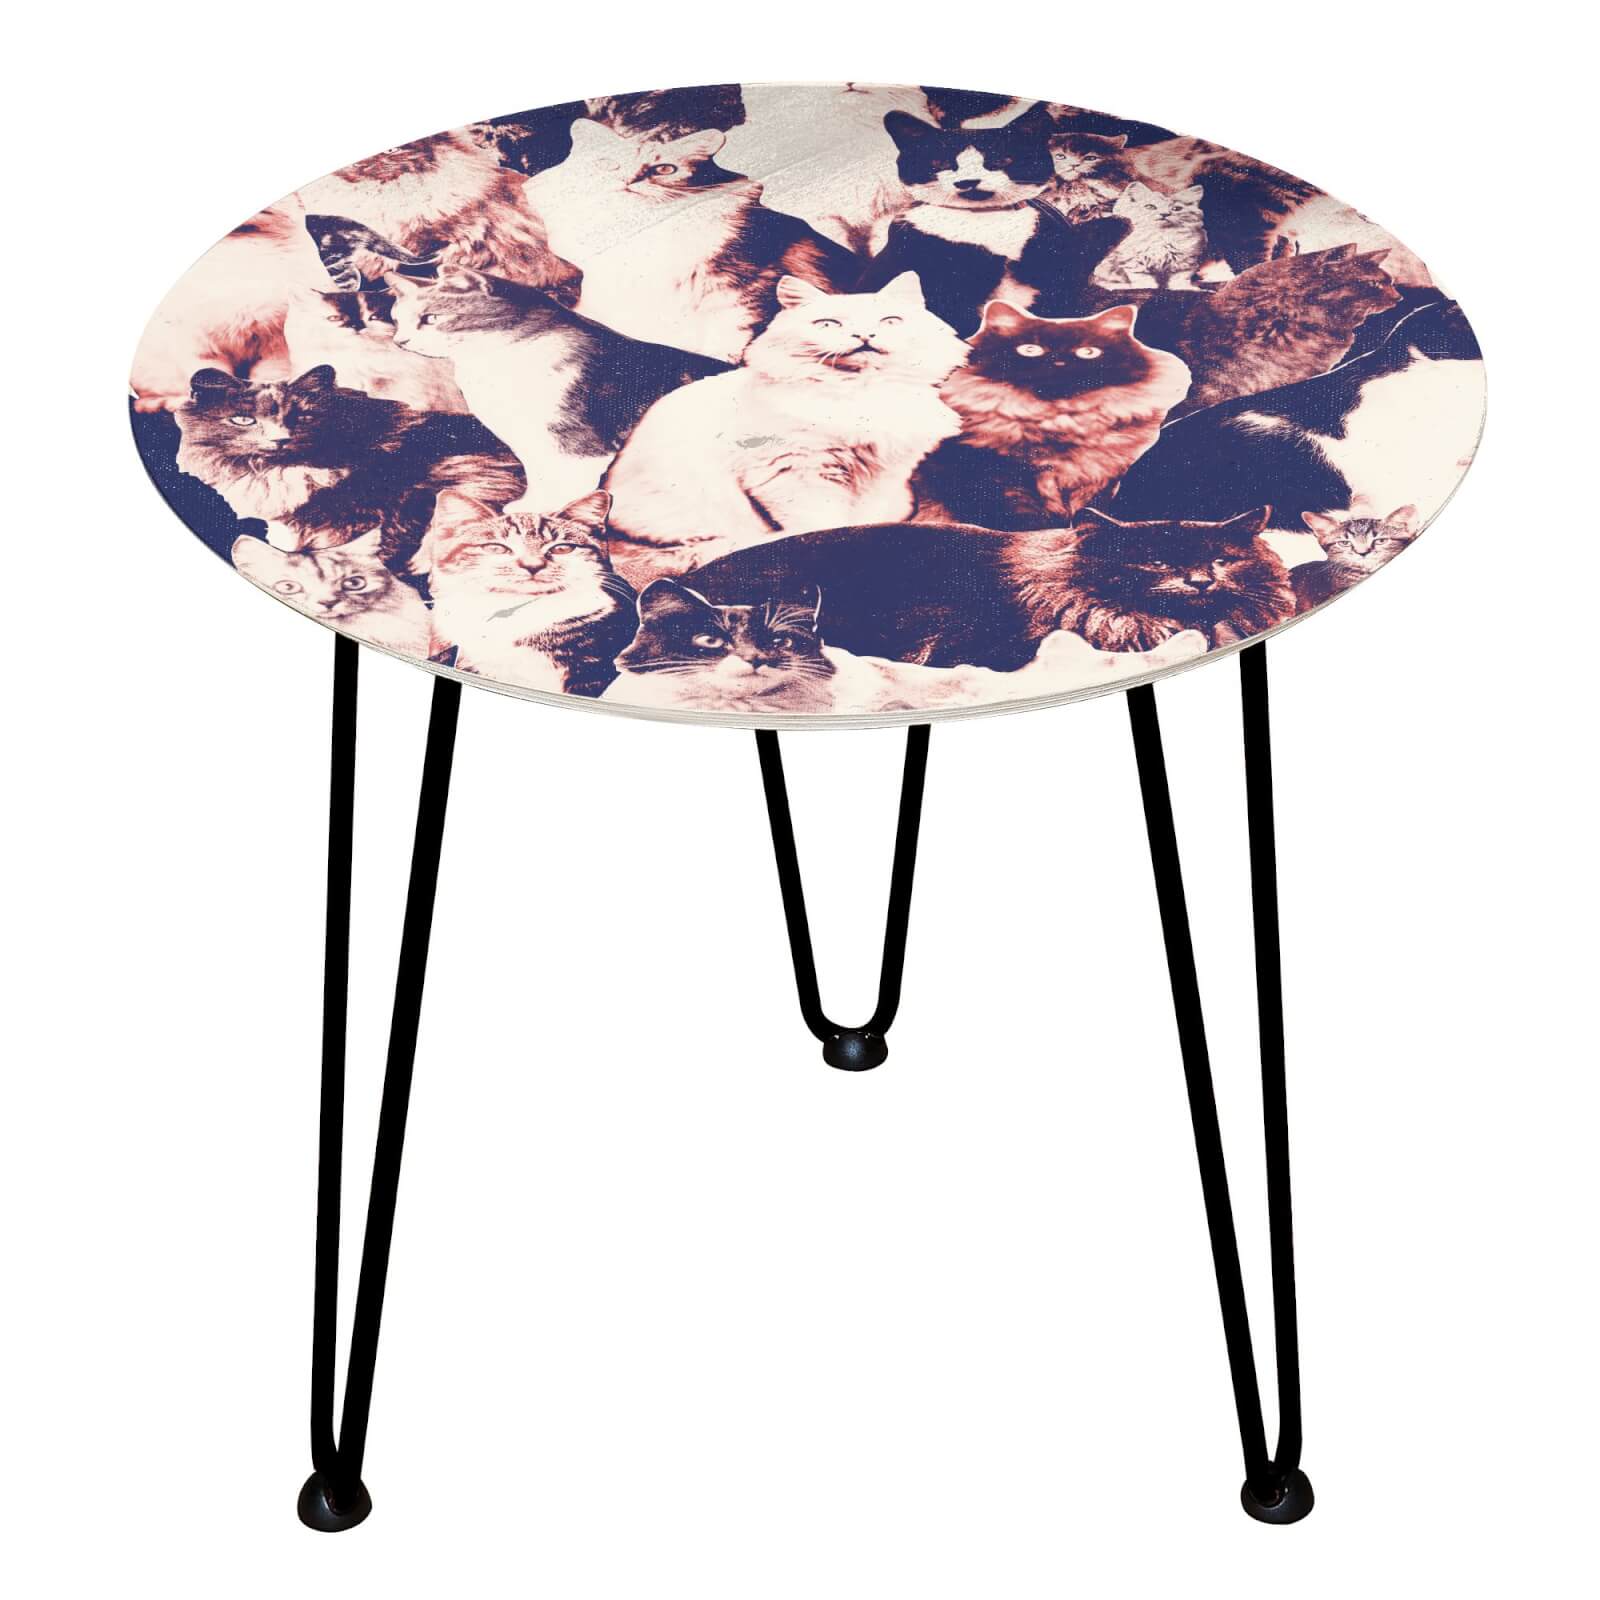 All The Cats Wooden Side Table - Black